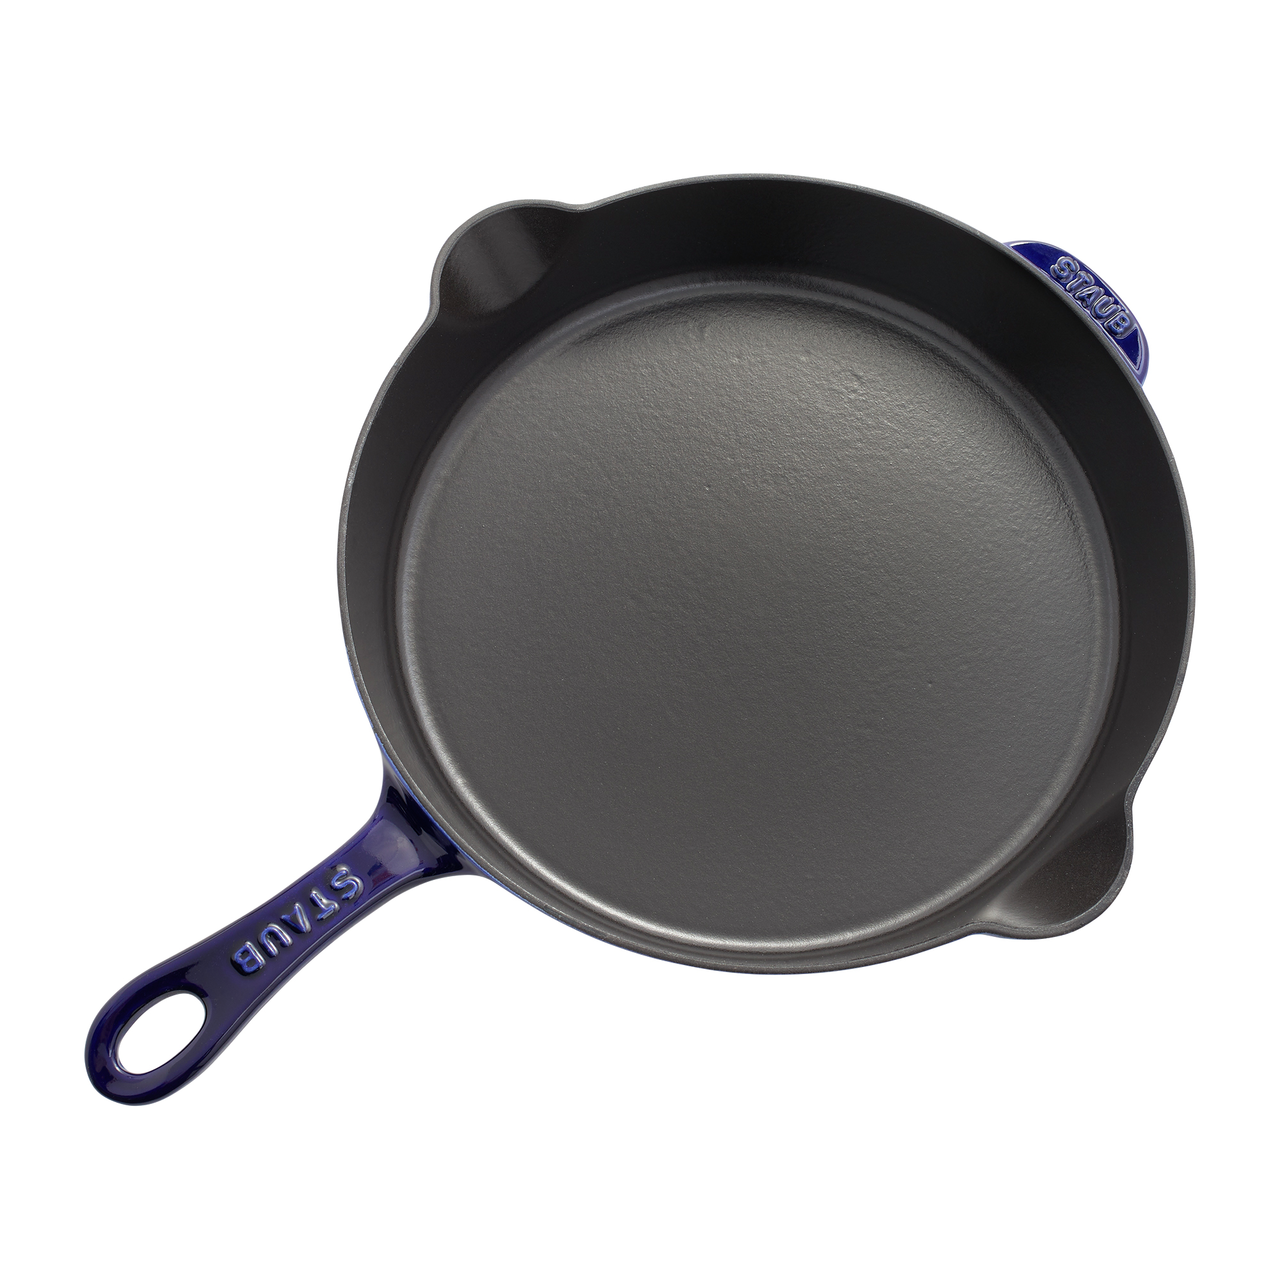 https://www.zwilling.com/on/demandware.static/-/Sites-zwilling-us-Library/default/dwab3d44cb/images/product-content/product-specific-images/staub-pdp-hotspot-modules/staub-traditional-skillet-blue.png